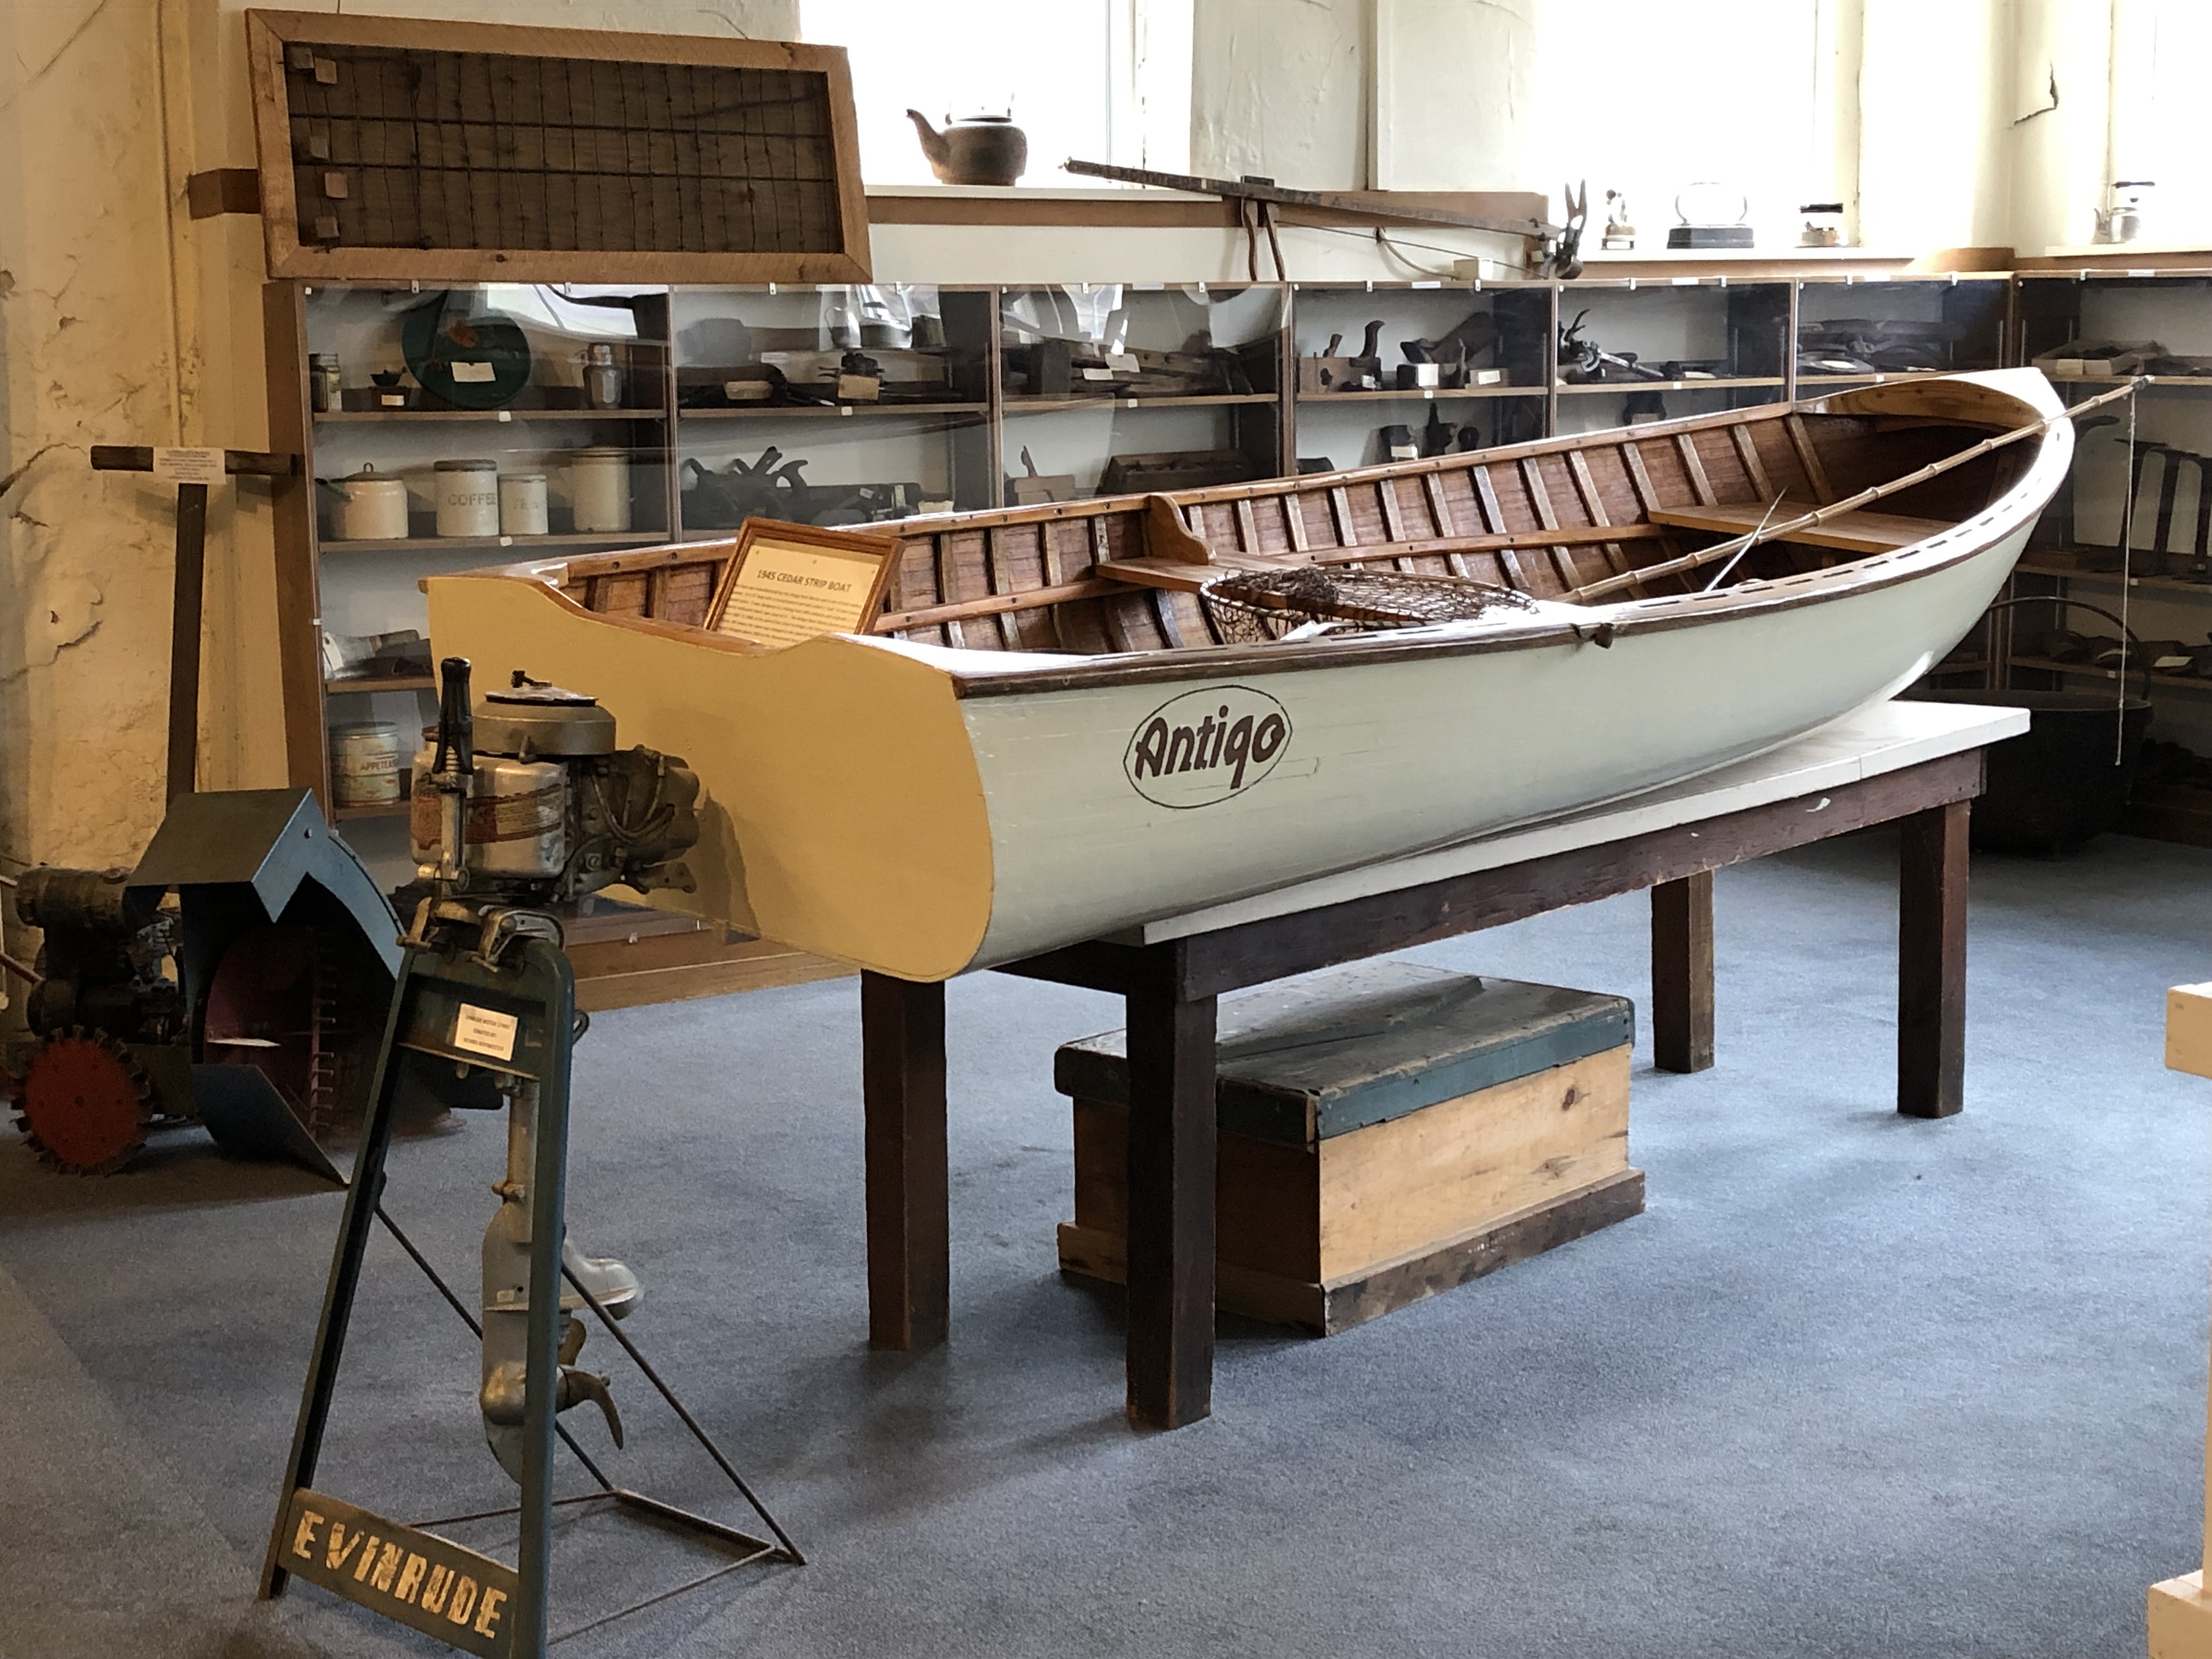 Boat, Watercraft, Musical instrument, Naval architecture